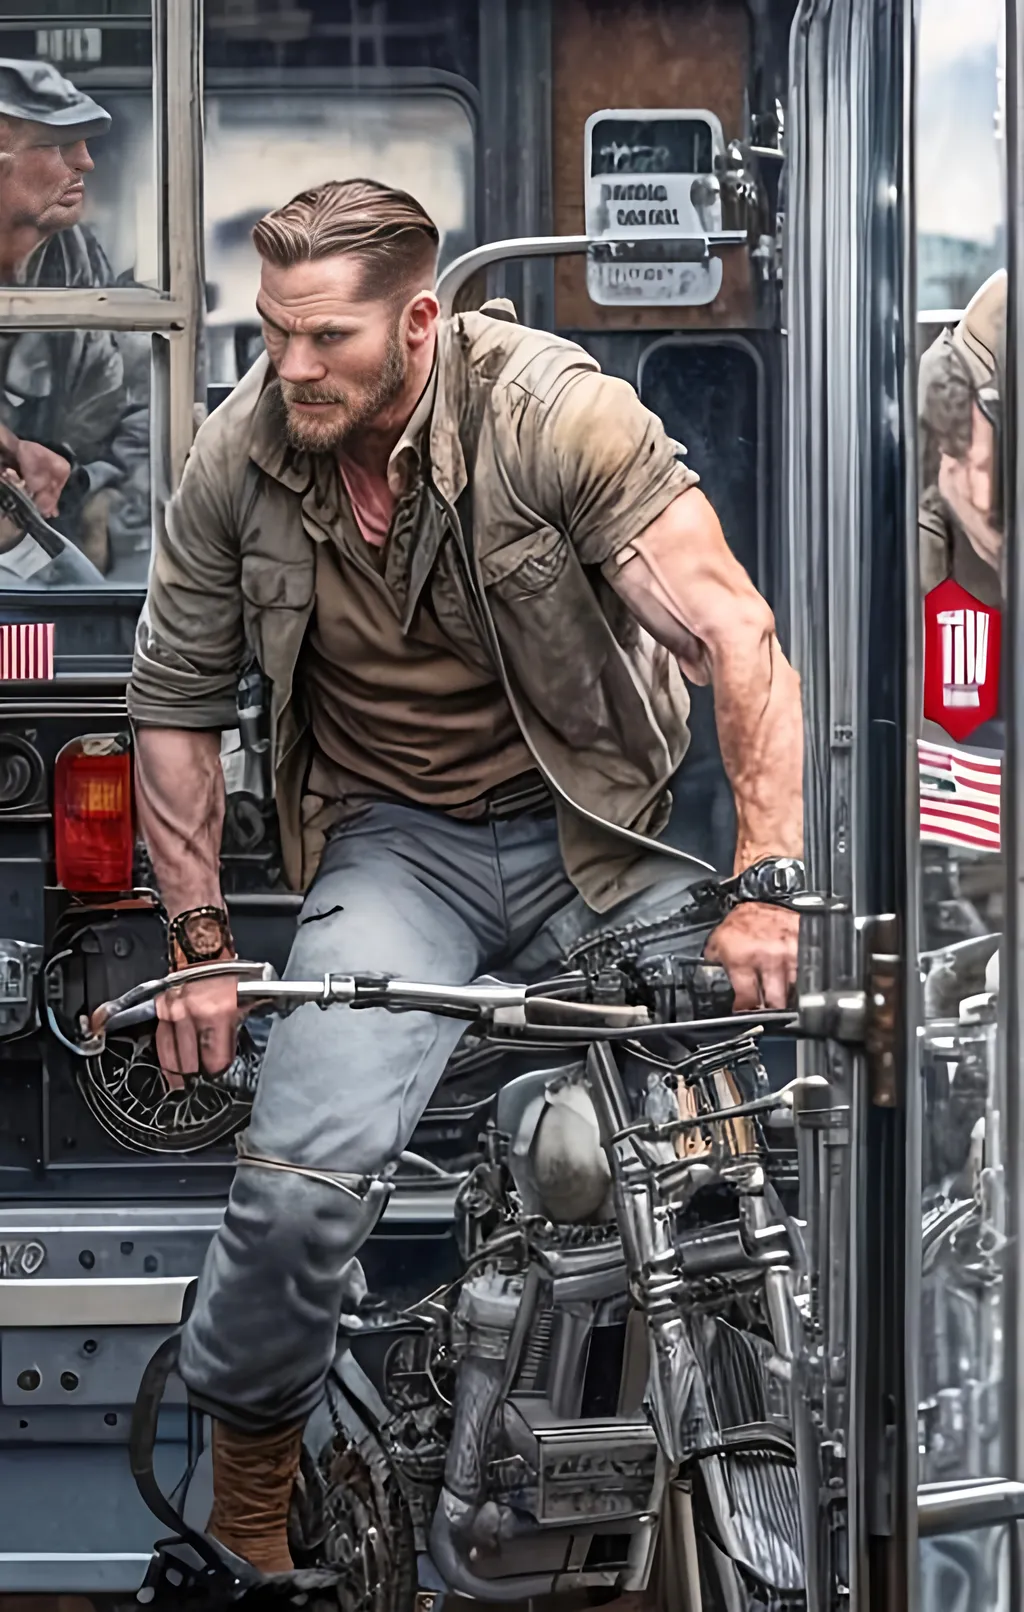 Prompt: create a highly detailed colored pencil drawing on grey paper, in the style of Norman Rockwell, Tsutomu Nihei and Steve Hanks. Every detail is meticulously captured, in HDR (High Dynamic Range), UHD (Ultra High Definition), and 1080p.   Tom Hardy transforms into the enigmatic John S. Fitzgerald  in the drama tv movie "The Revenant." use costumes from the movie.

use all best practices in art and design to produce what would be recognized as a master work art piece. use accurate perspective and foreshortening. use atmospheric perspective. create expressive faces and use dramatic lighting. fur coat and fur hat.


Tom Hardy transforms into the enigmatic John S. Fitzgerald, a fur trapper with a volatile temperament and a menacing physicality. Hardy's portrayal captures Fitzgerald's hardened exterior and cunning nature. Dressed in layers of weather-beaten clothing, with a fur-trimmed coat that adds an air of ruthlessness, Hardy's wardrobe complements the character's merciless disposition. Fitzgerald's appearance is as jagged and unpredictable as the treacherous landscape he navigates.
